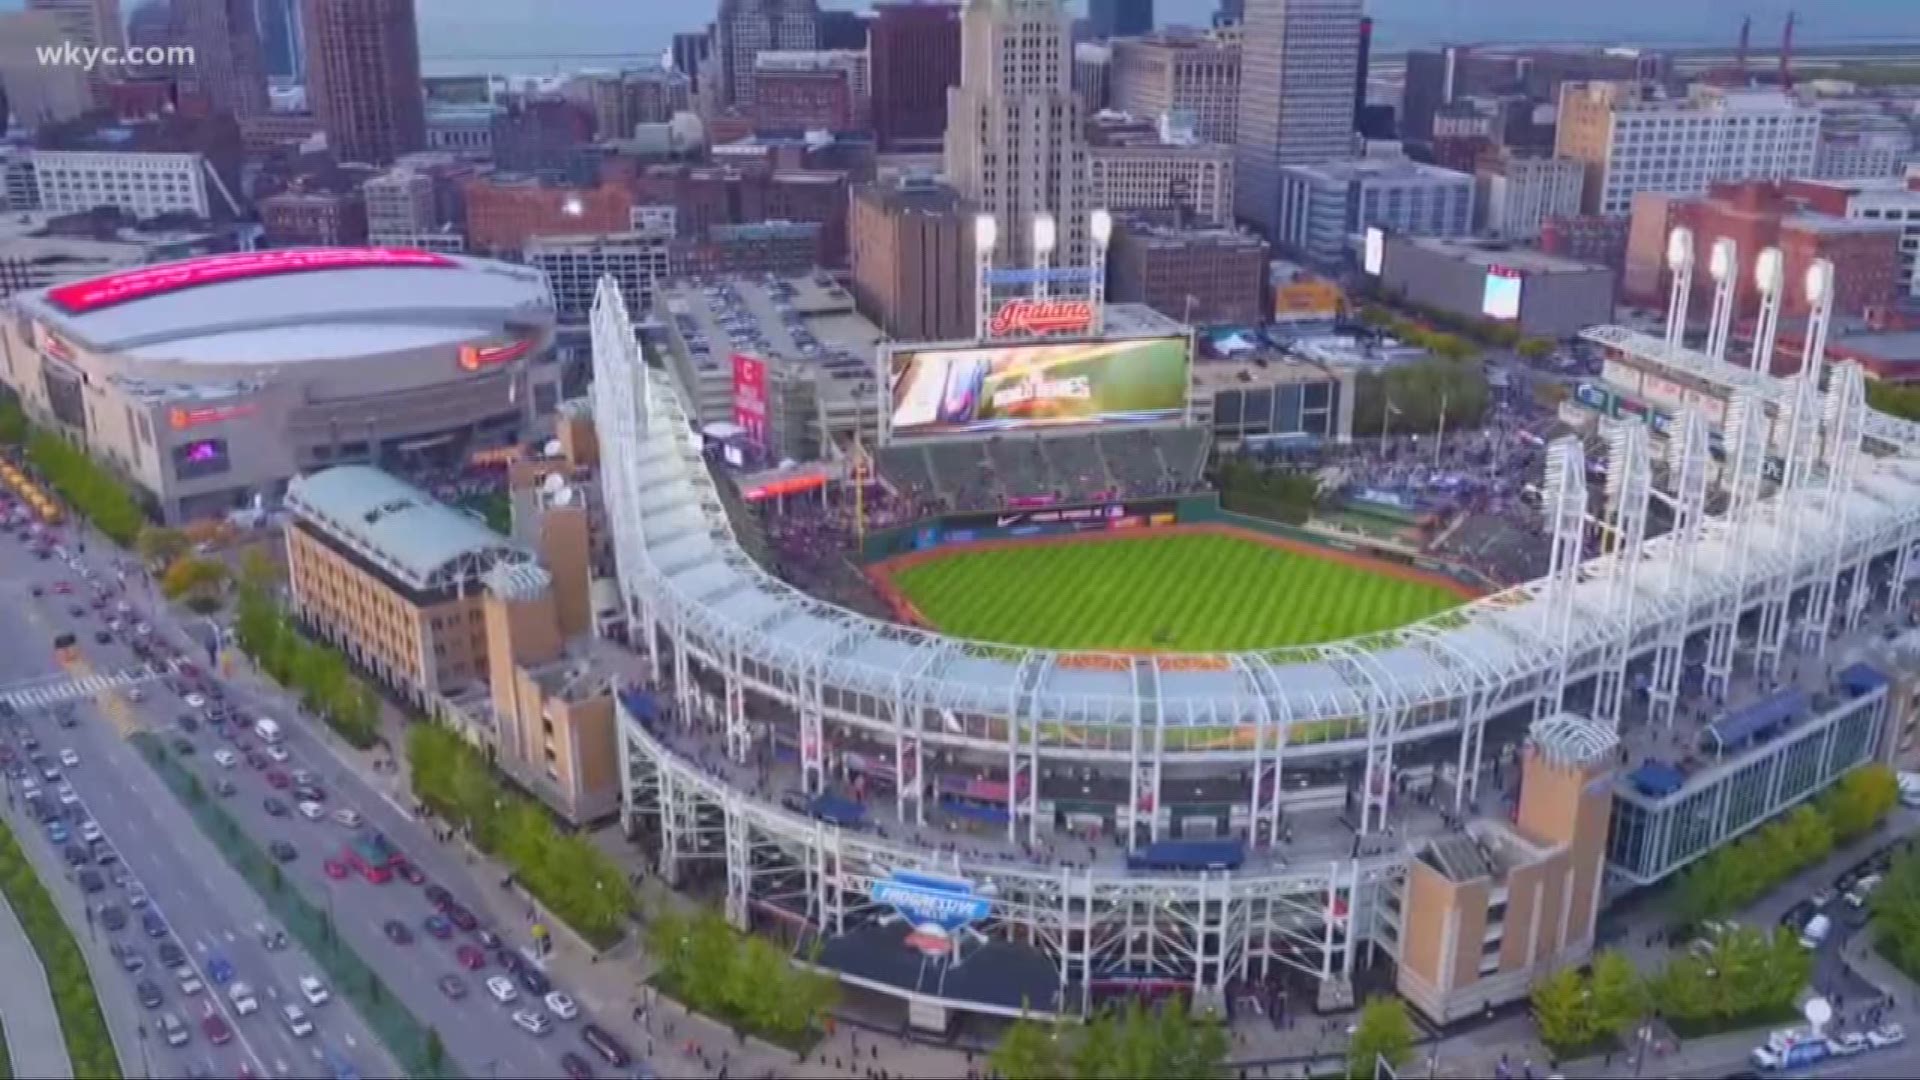 April 1, 2019: Here's an overview of what you can expect when visiting Progressive Field for a Cleveland Indians game this season.